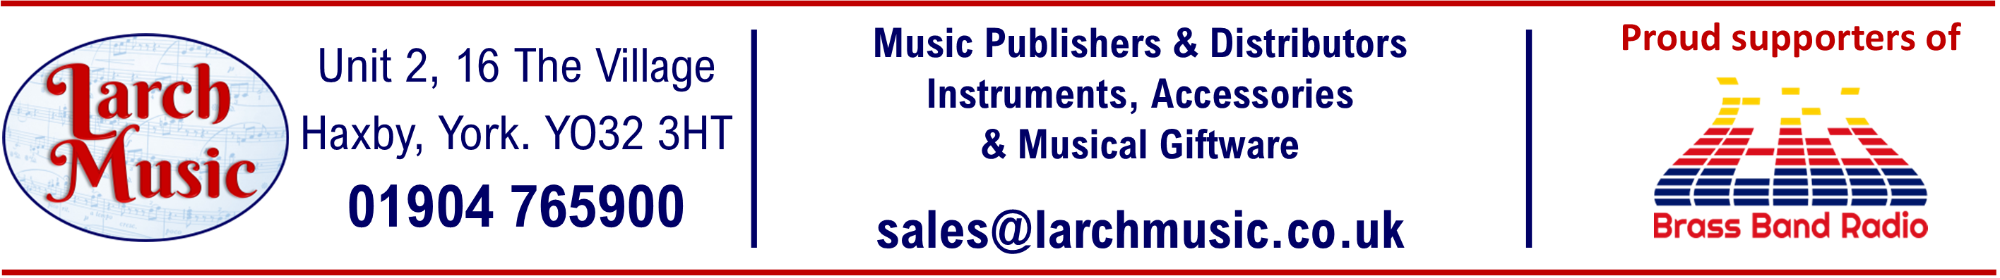 Larch Music Front Page Header